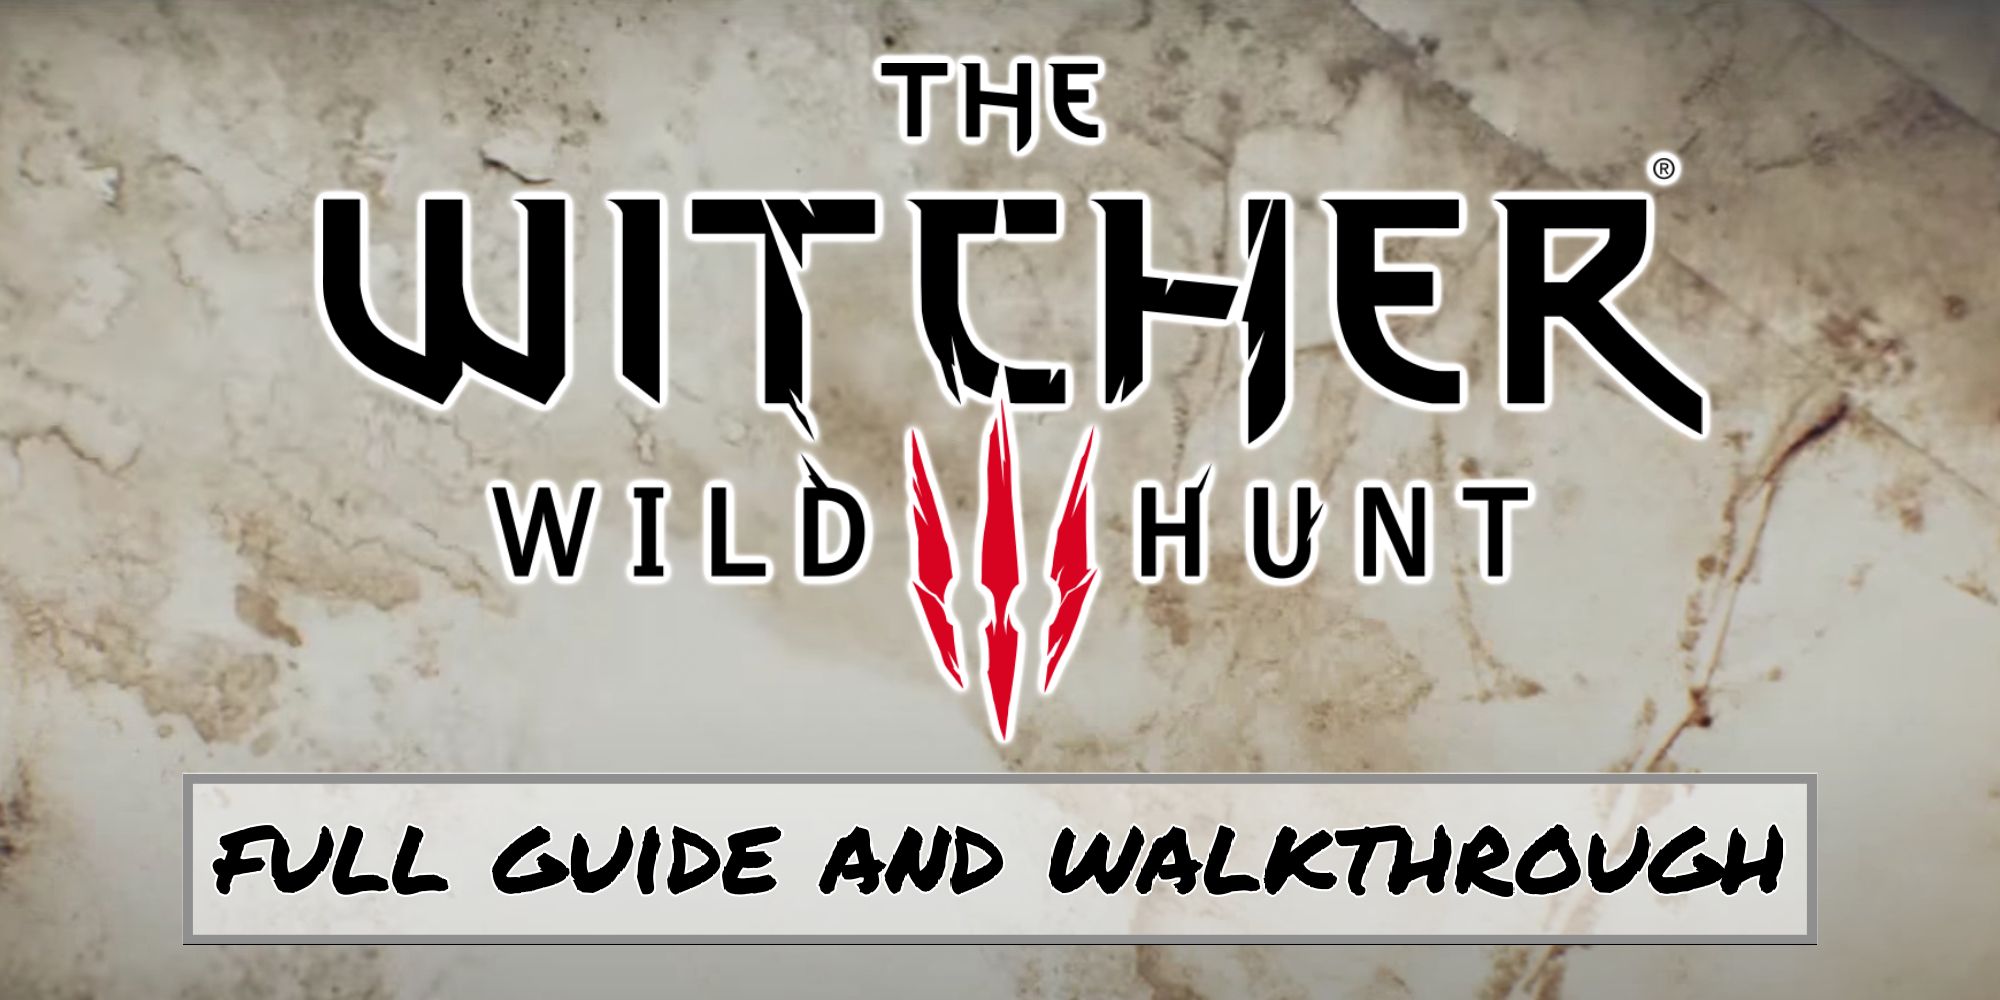 The Witcher 3: Wild Hunt Tips and Tricks